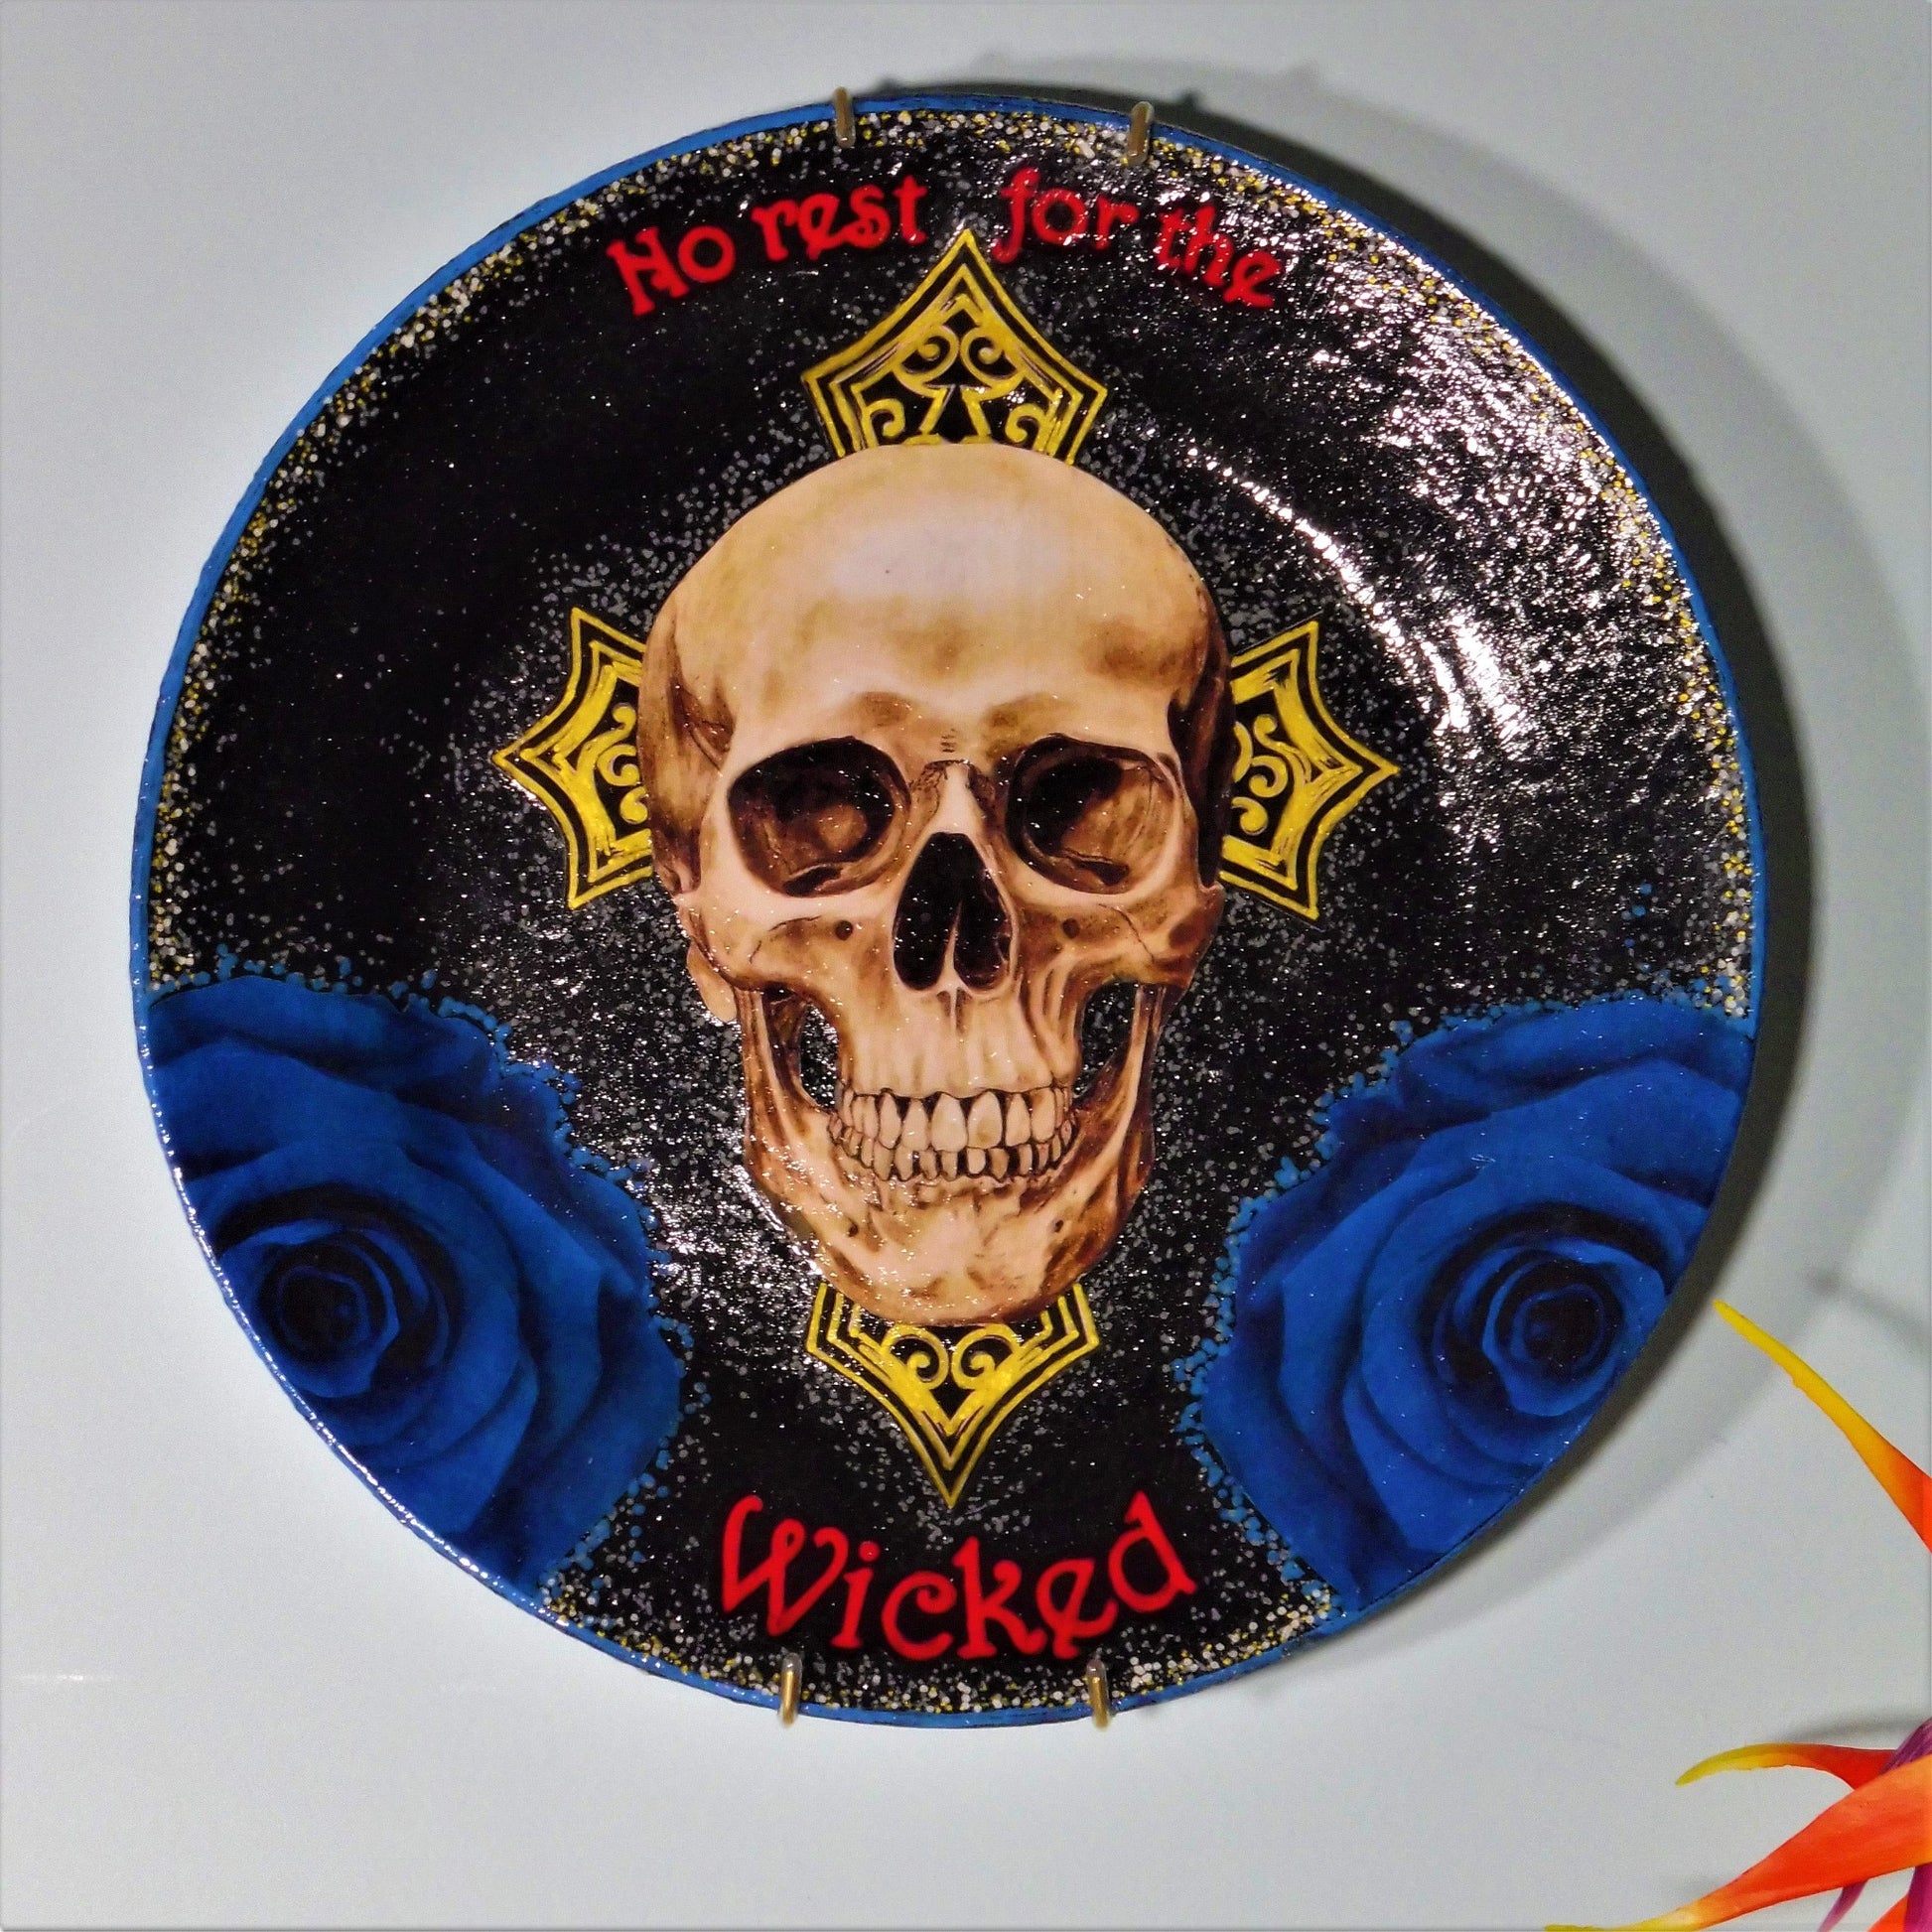 House of Frisson "No Rest For The Wicked" Black Wall Plate front. Collage artwork featuring a skull, a cross, and blue roses, on a black background. Plate hanging on a wall.